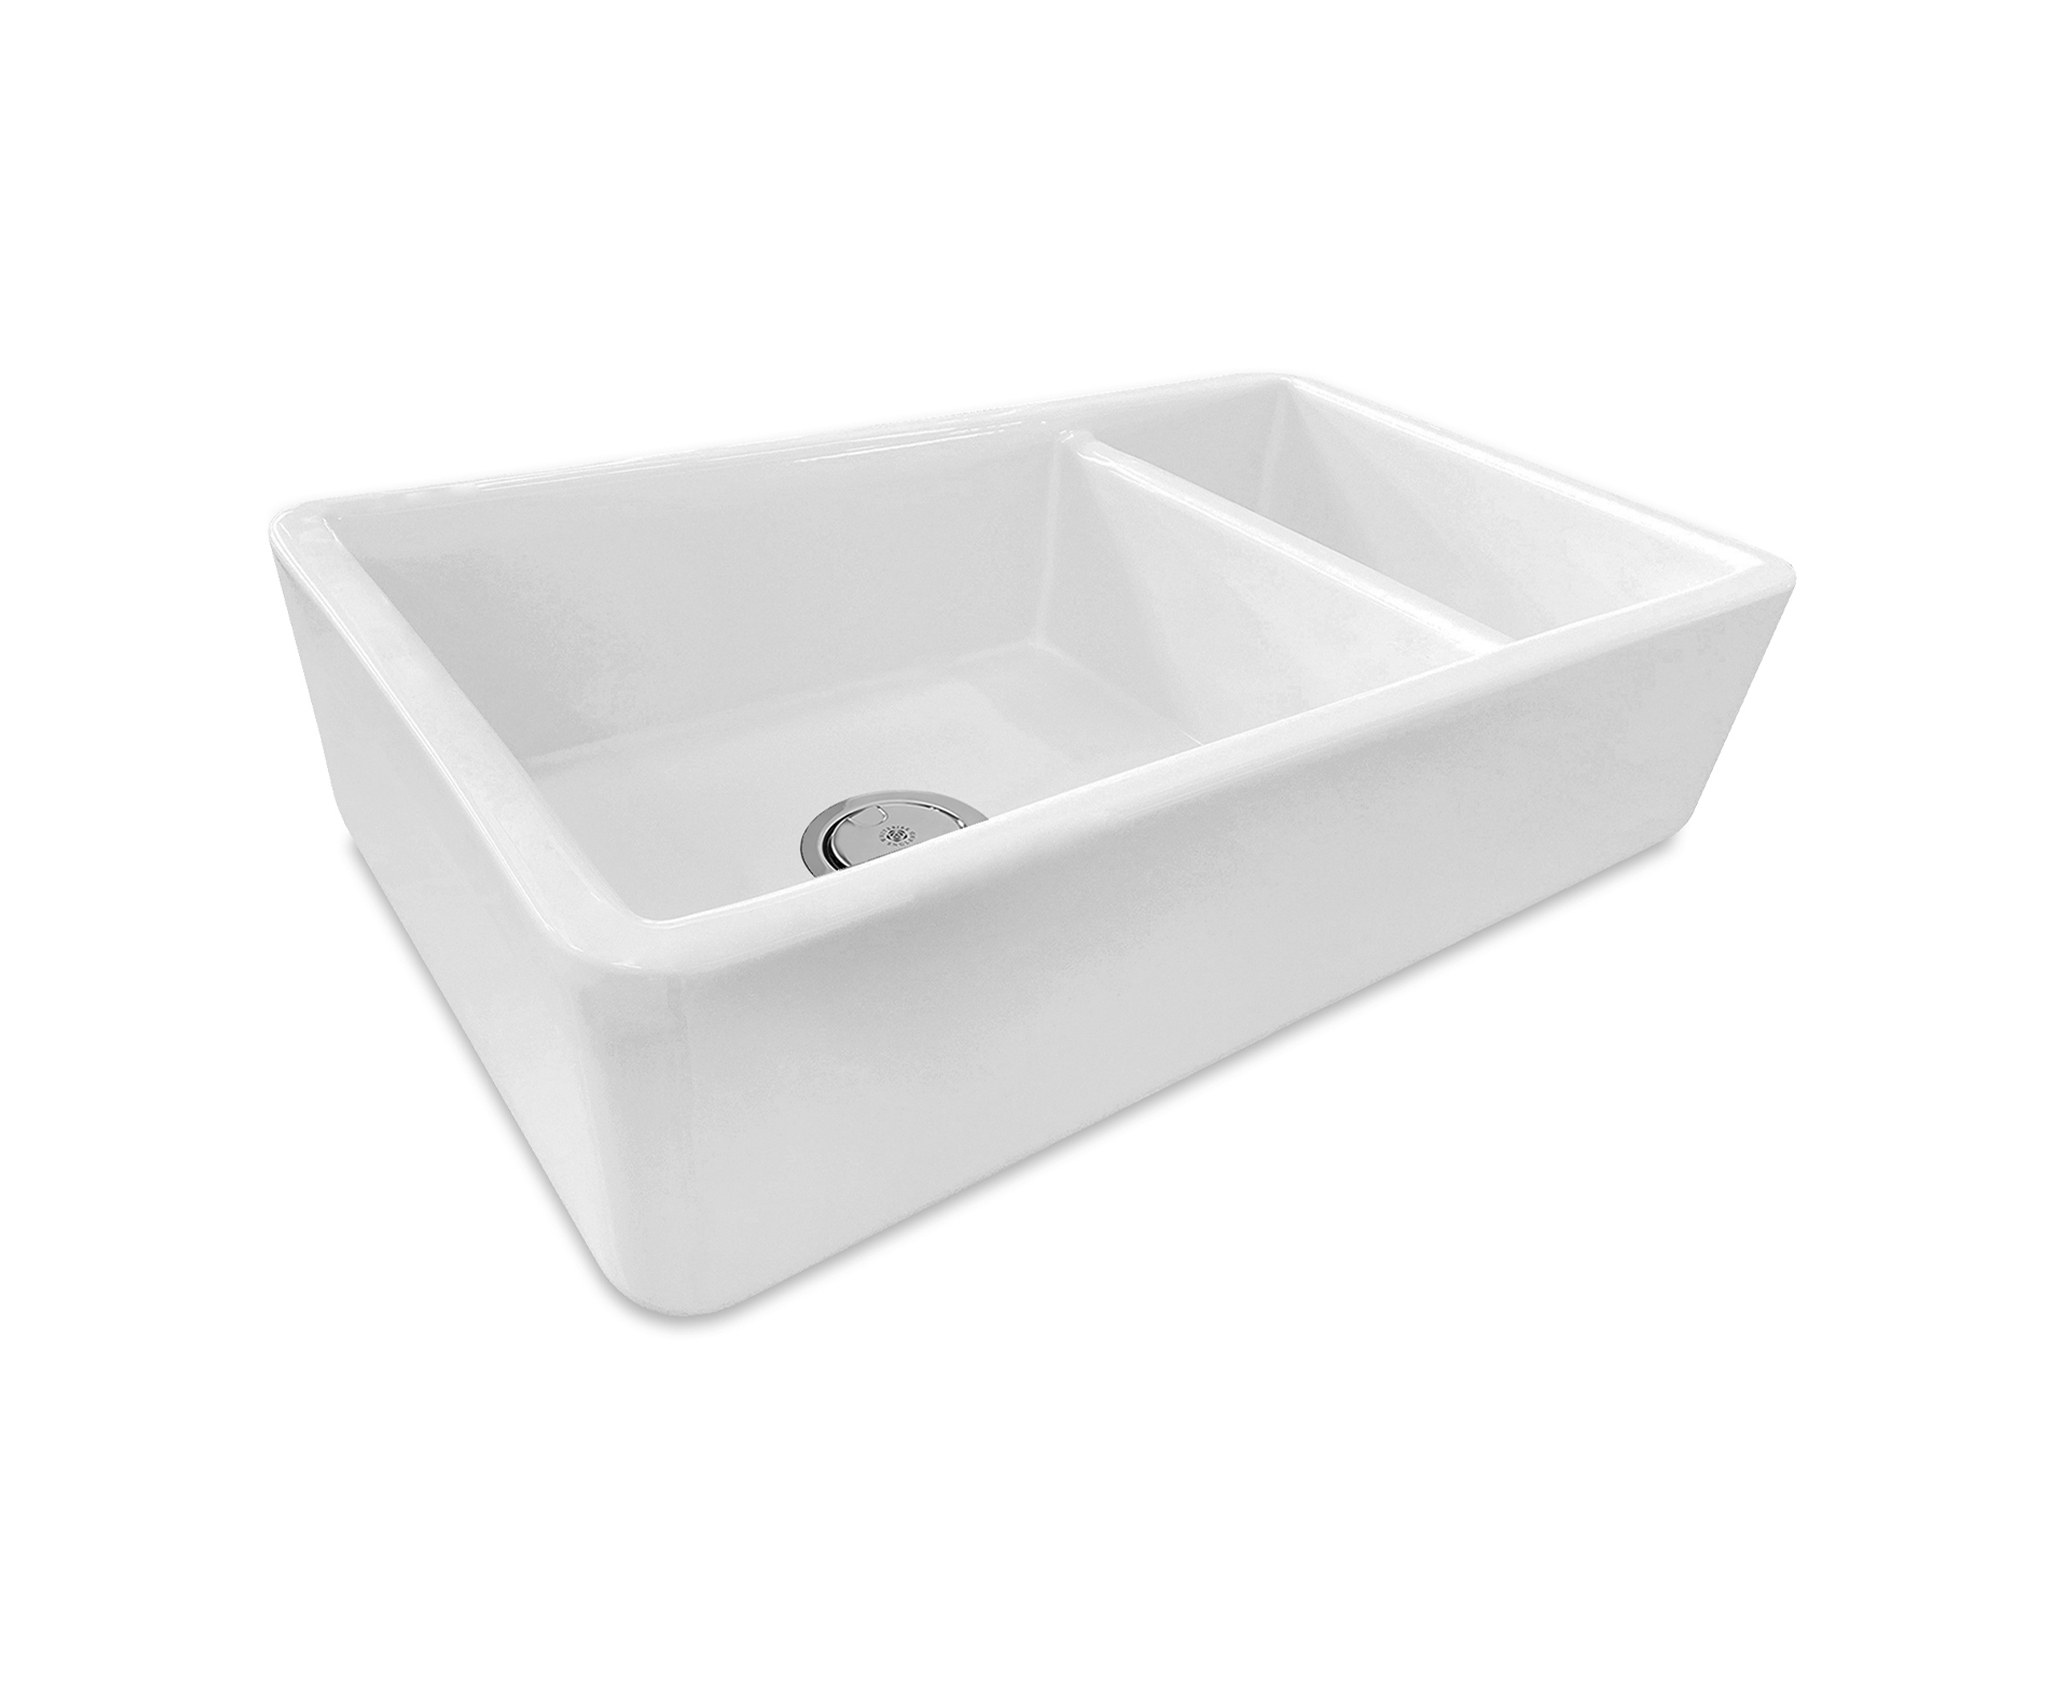 bowl-and-a-half-sink